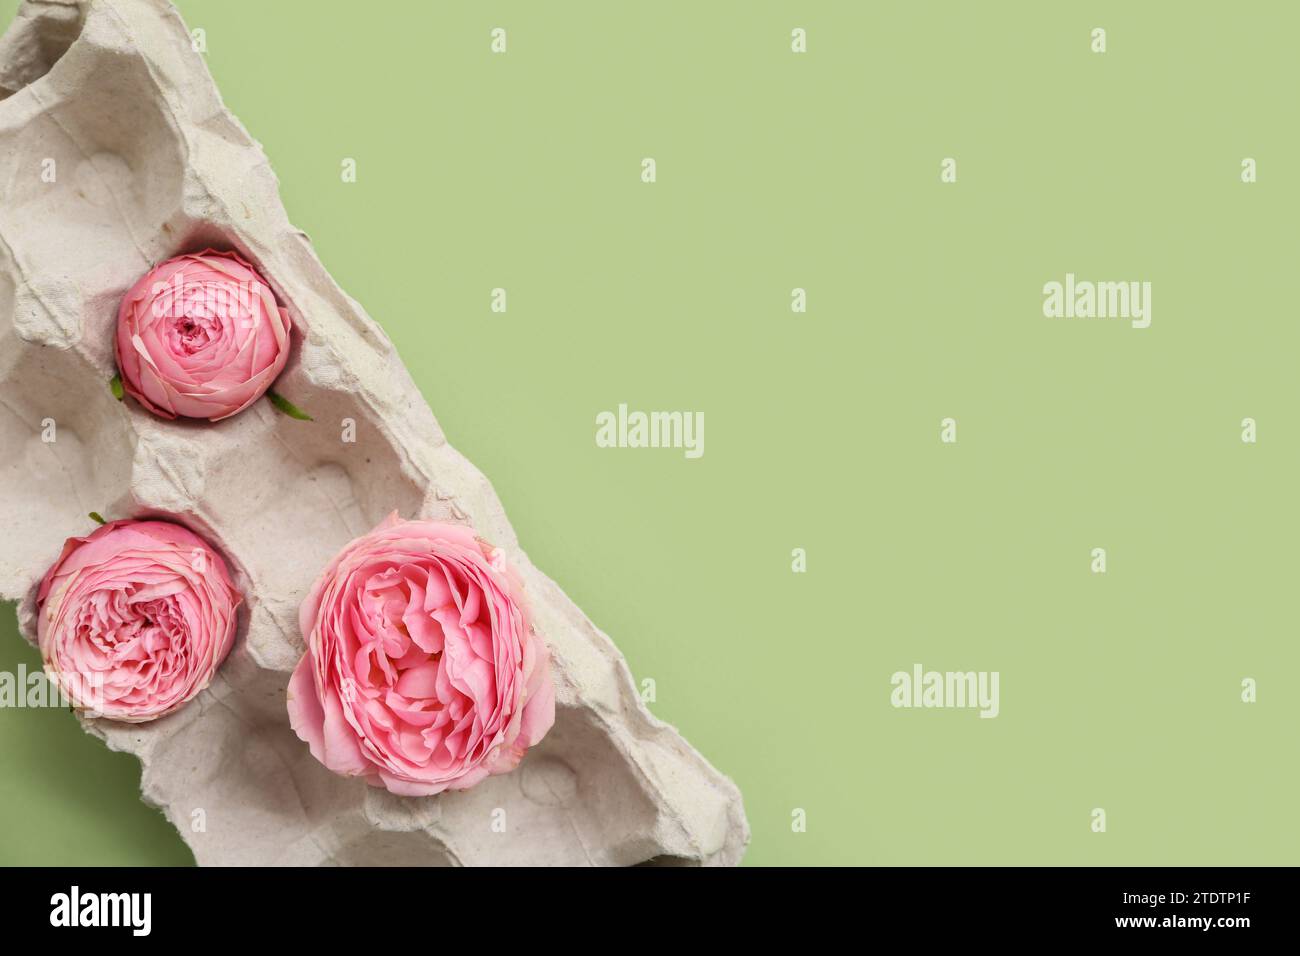 Composition with cardboard egg holder with beautiful rose flowers on color background Stock Photo